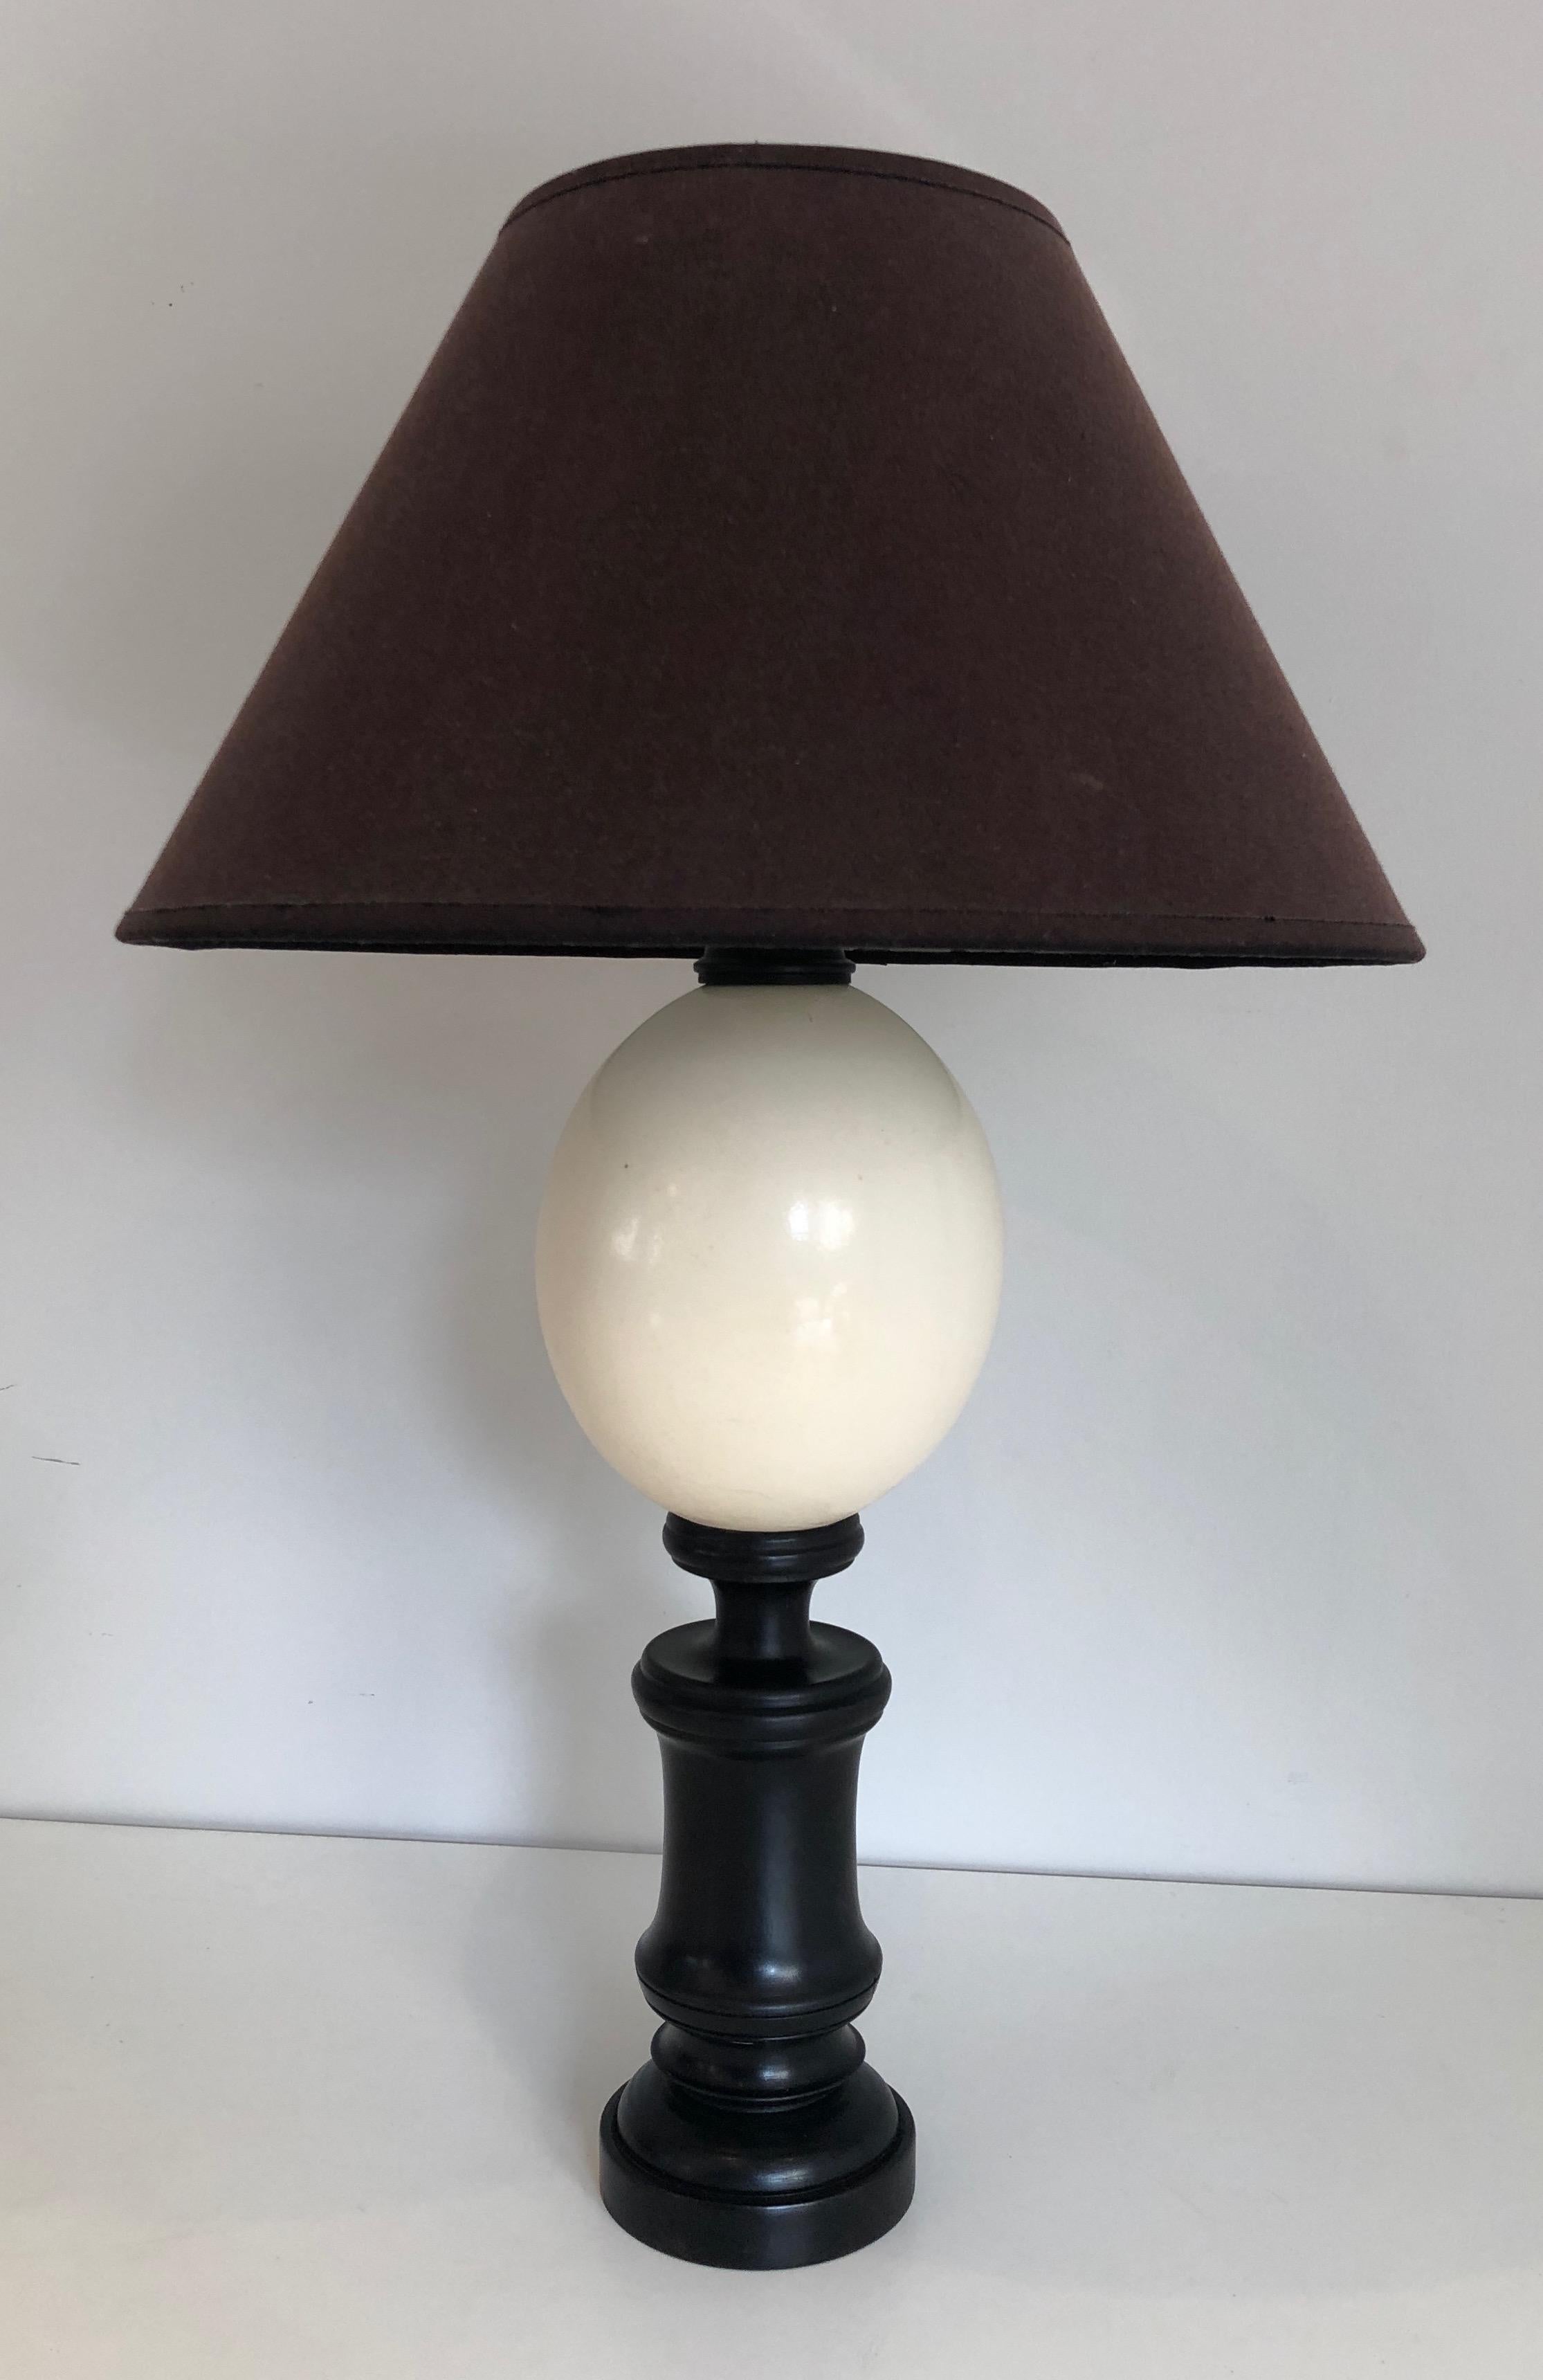 Blackened Wood and Ostrich Eggshell Table Lamp, French Work, Circa 1970 For Sale 3